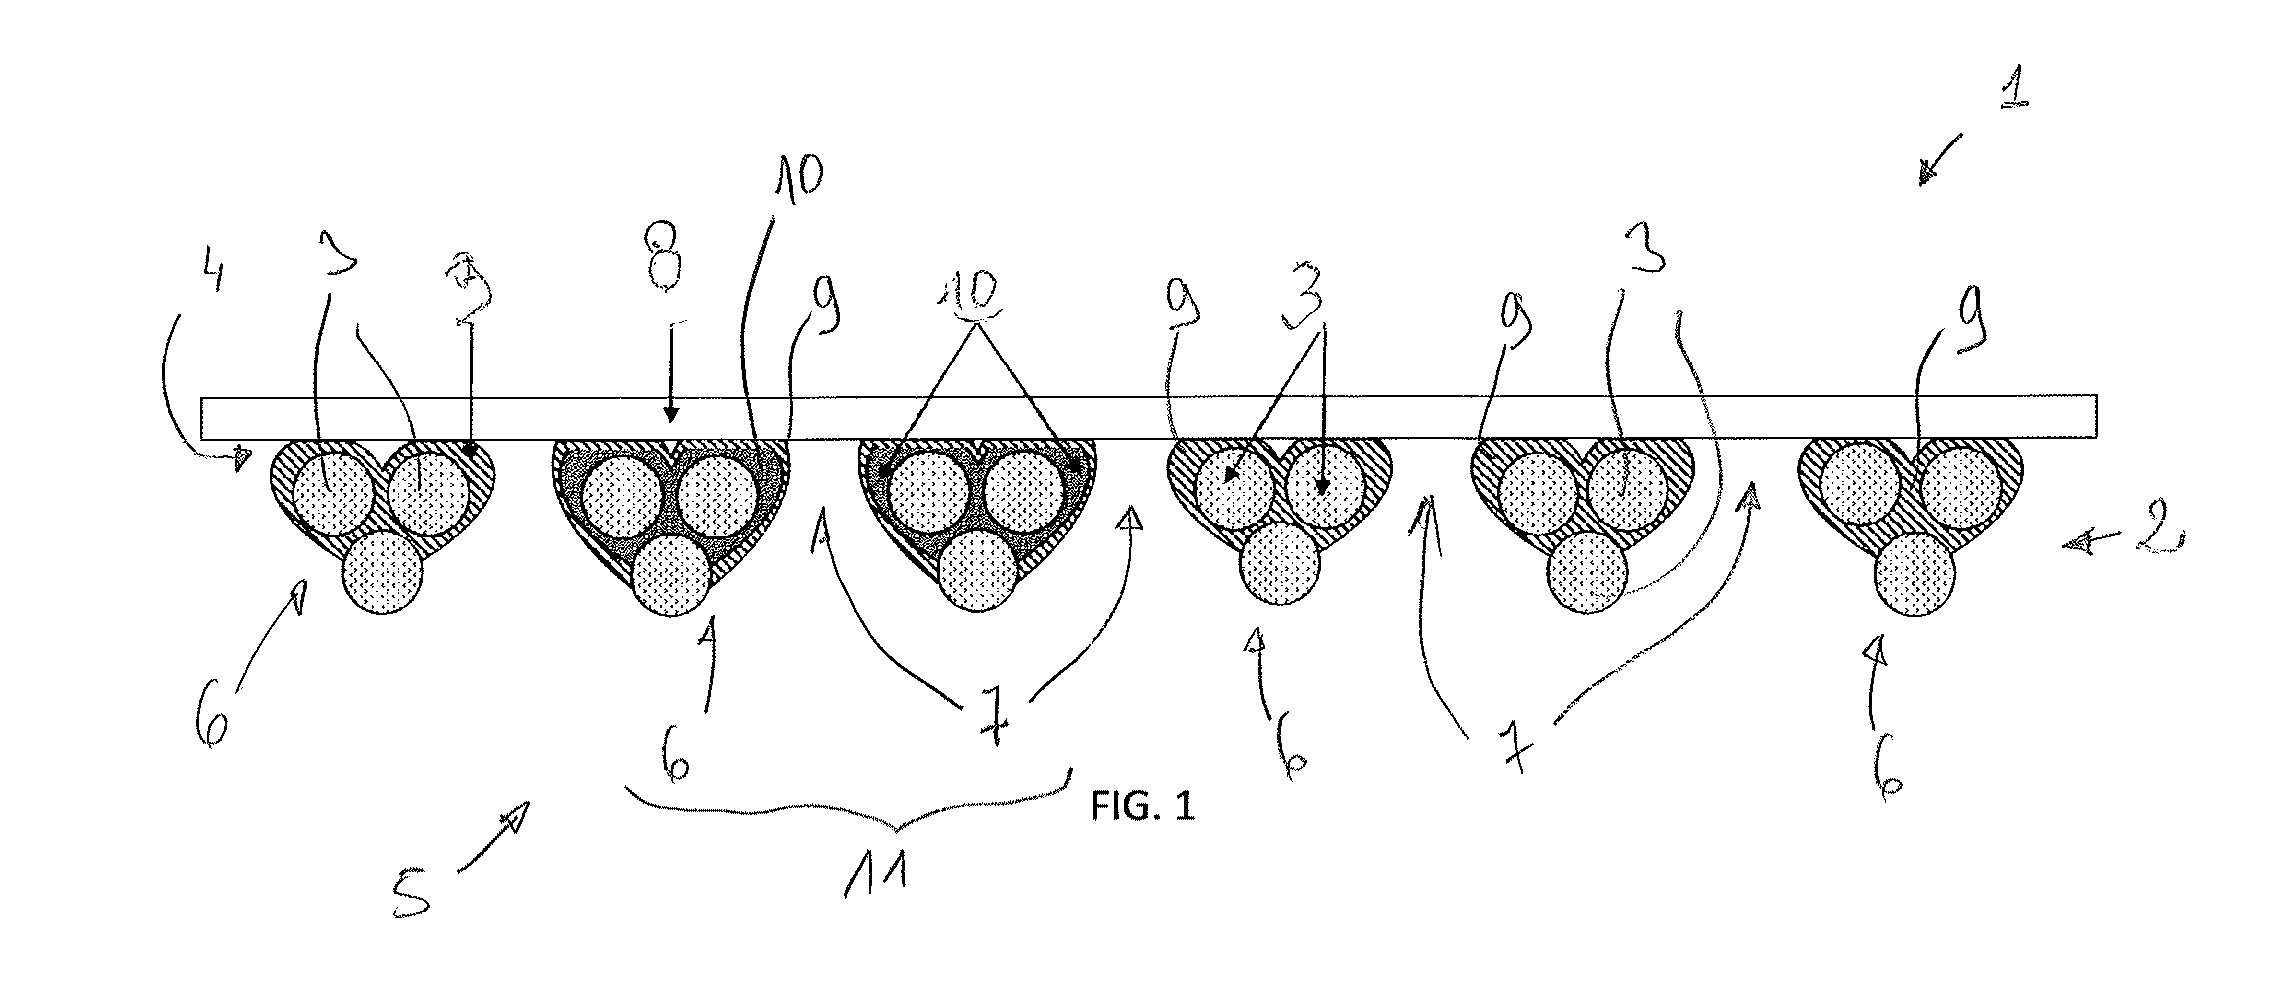 Synthetic prosthesis comprising a knit and a non porous film and method for forming same